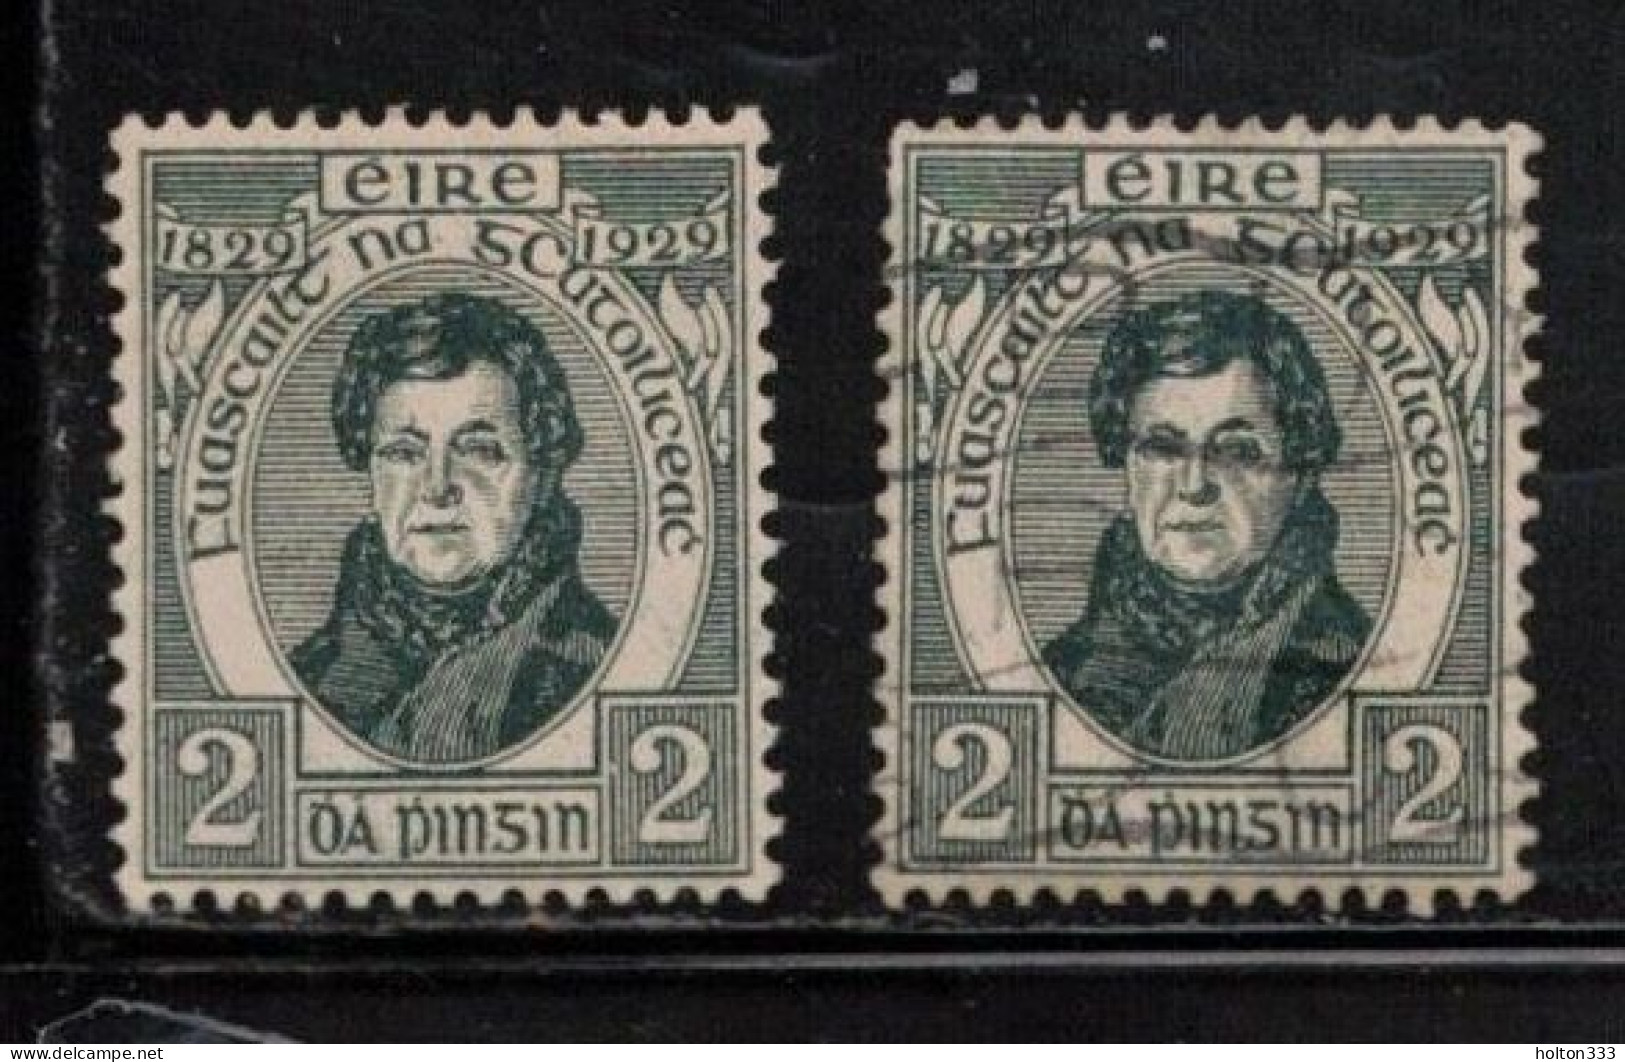 IRELAND Scott # 80 MH & Used - Daniel O'Connell B - Unused Stamps